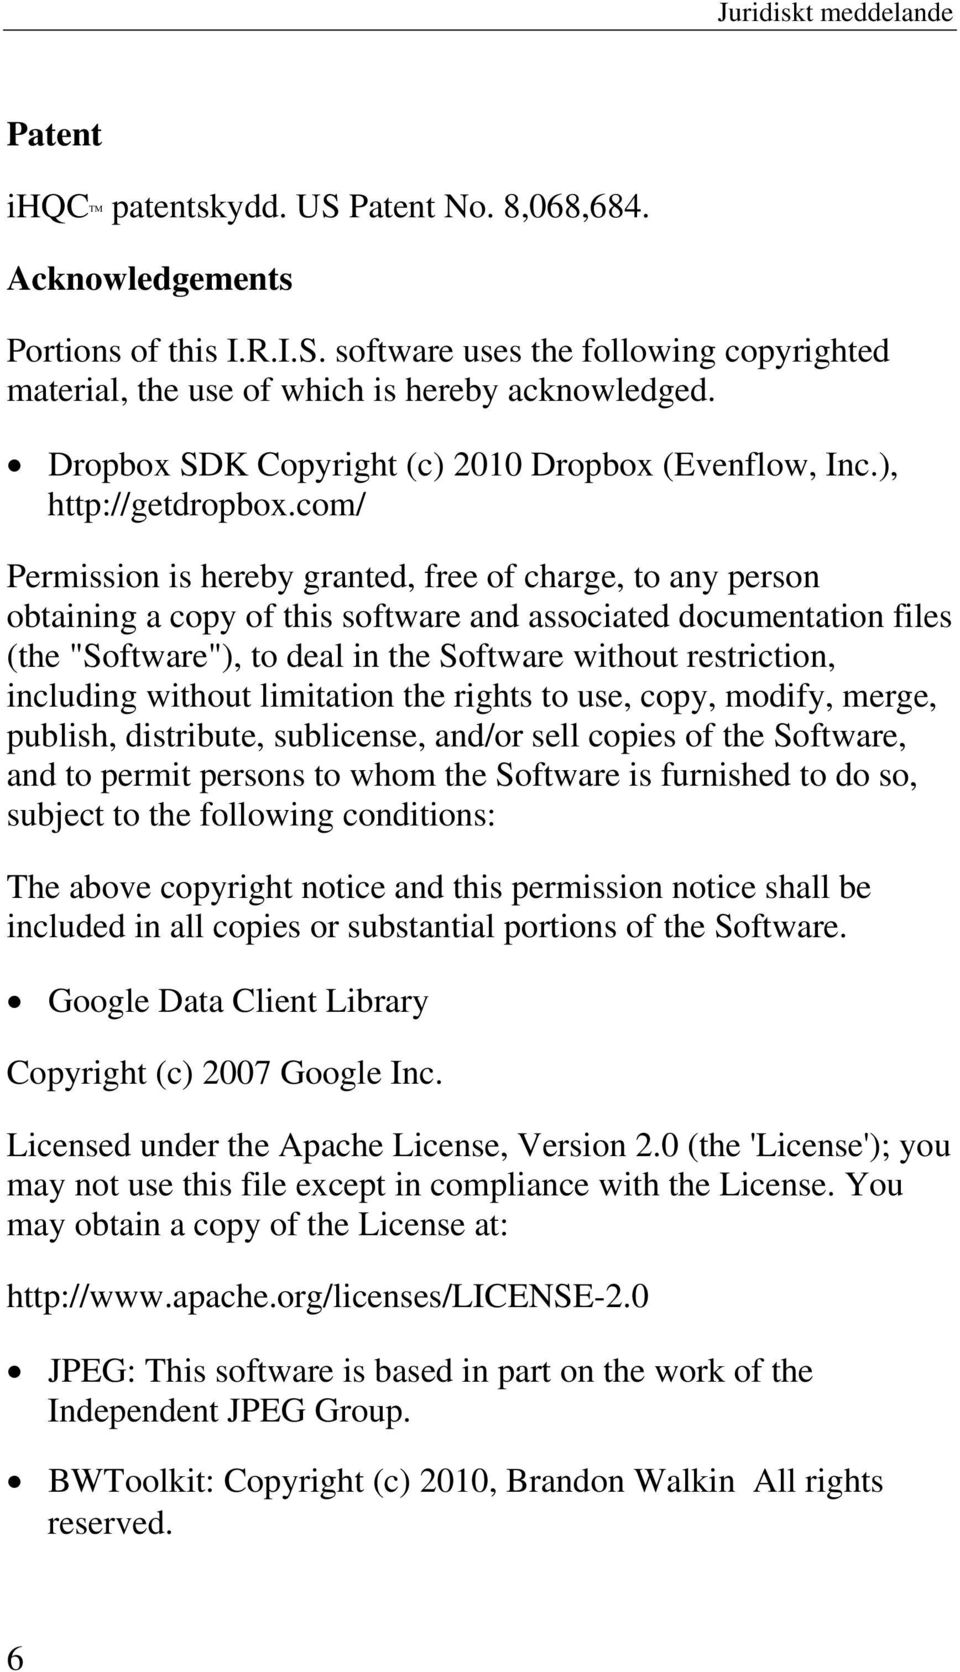 com/ Permission is hereby granted, free of charge, to any person obtaining a copy of this software and associated documentation files (the "Software"), to deal in the Software without restriction,